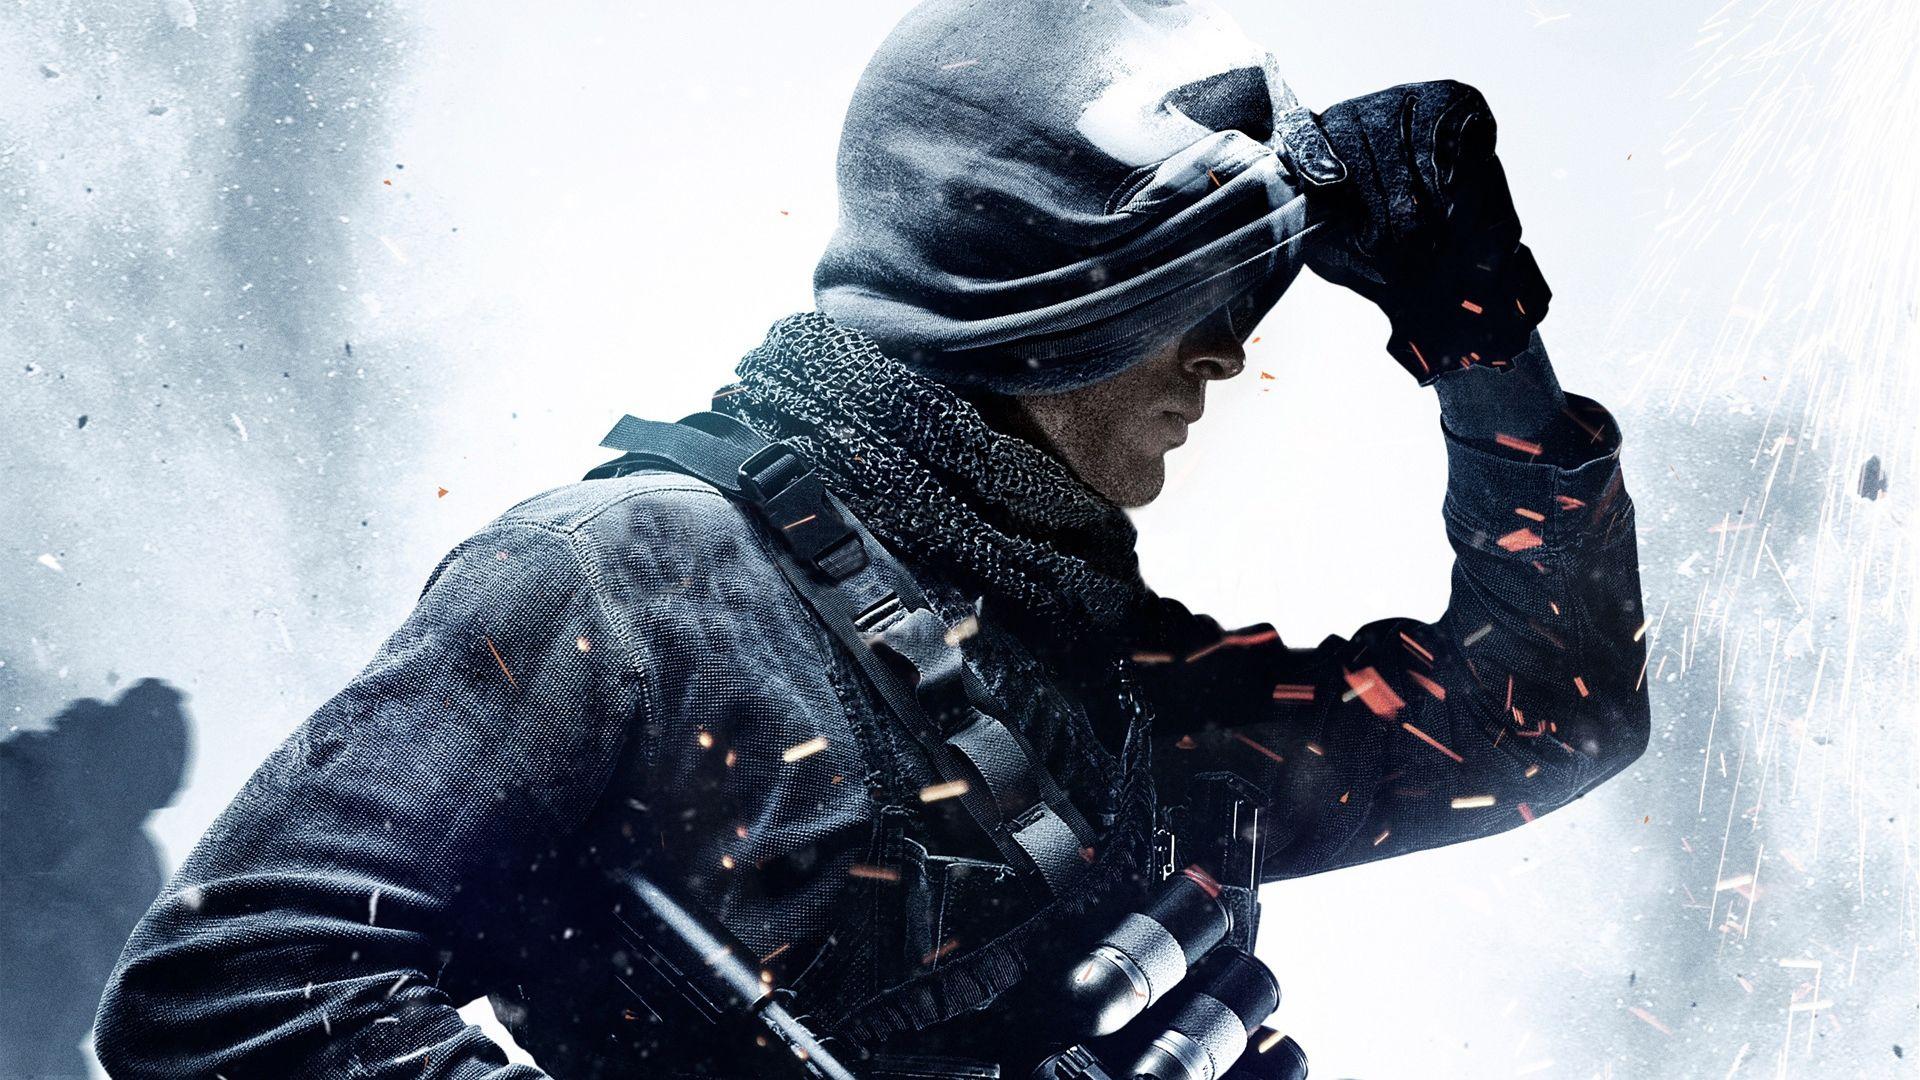 Call of Duty: Ghosts Gets 2GB Patch on Xbox One, Introduces 'Are You